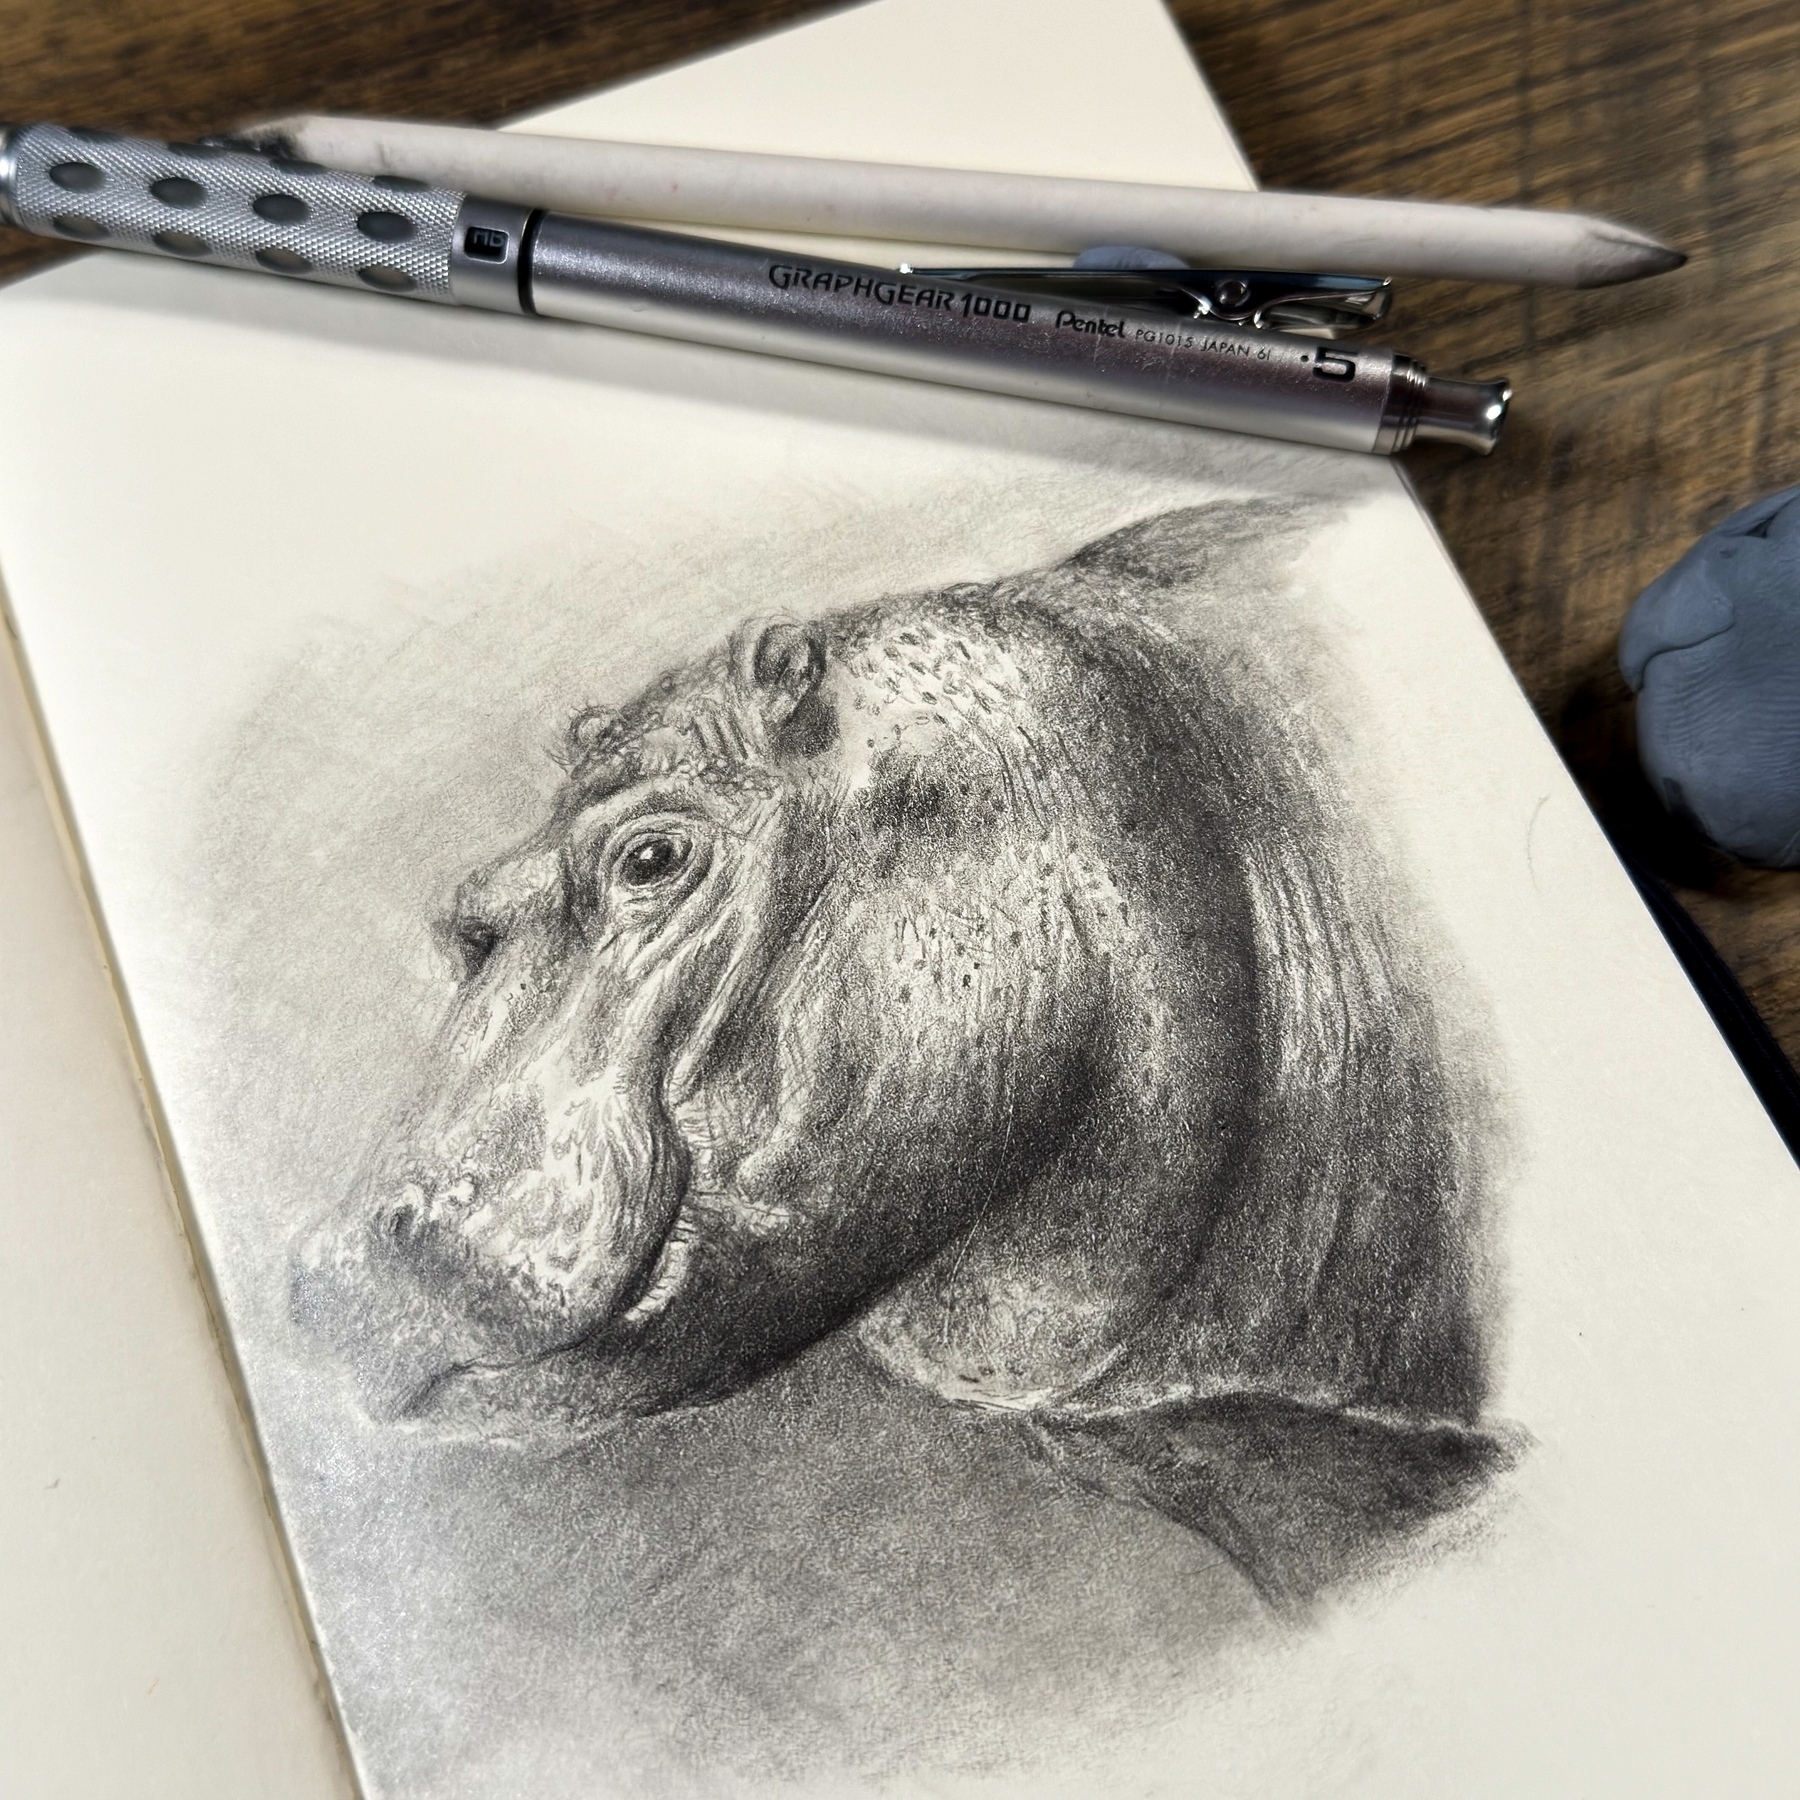 Detailed pencil sketch of a hippopotamus' head on paper, with a mechanical pencils resting above. The artwork captures the texture of the hippo's skin and its calm expression.